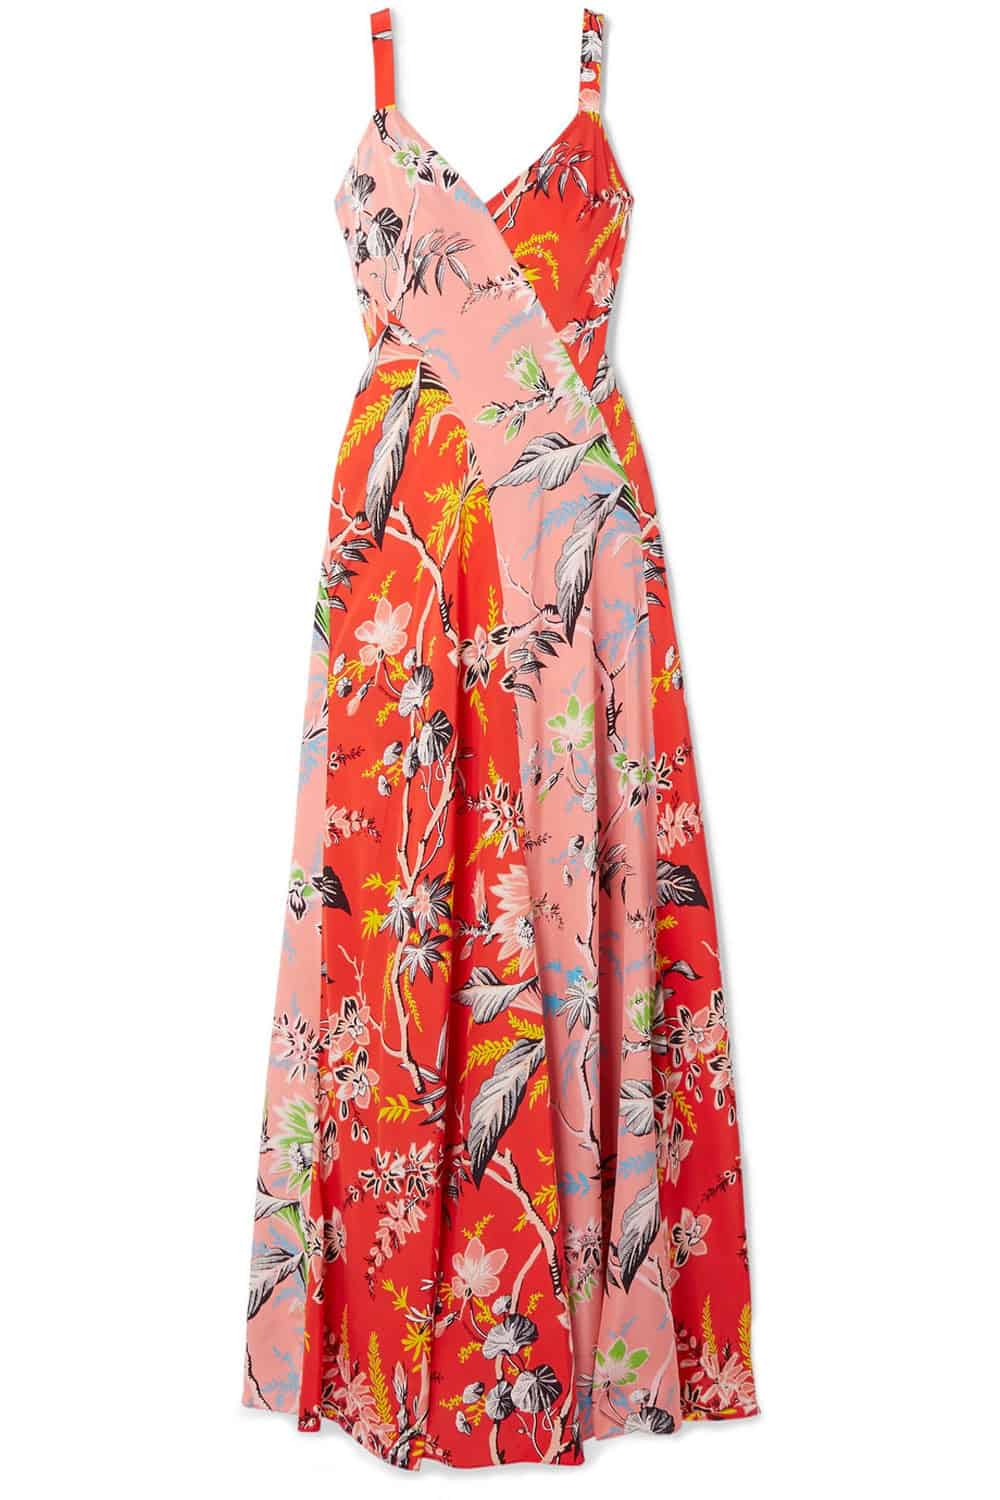 15 Chic and Easy Dresses Perfect for Summer Weddings - Daily Front Row